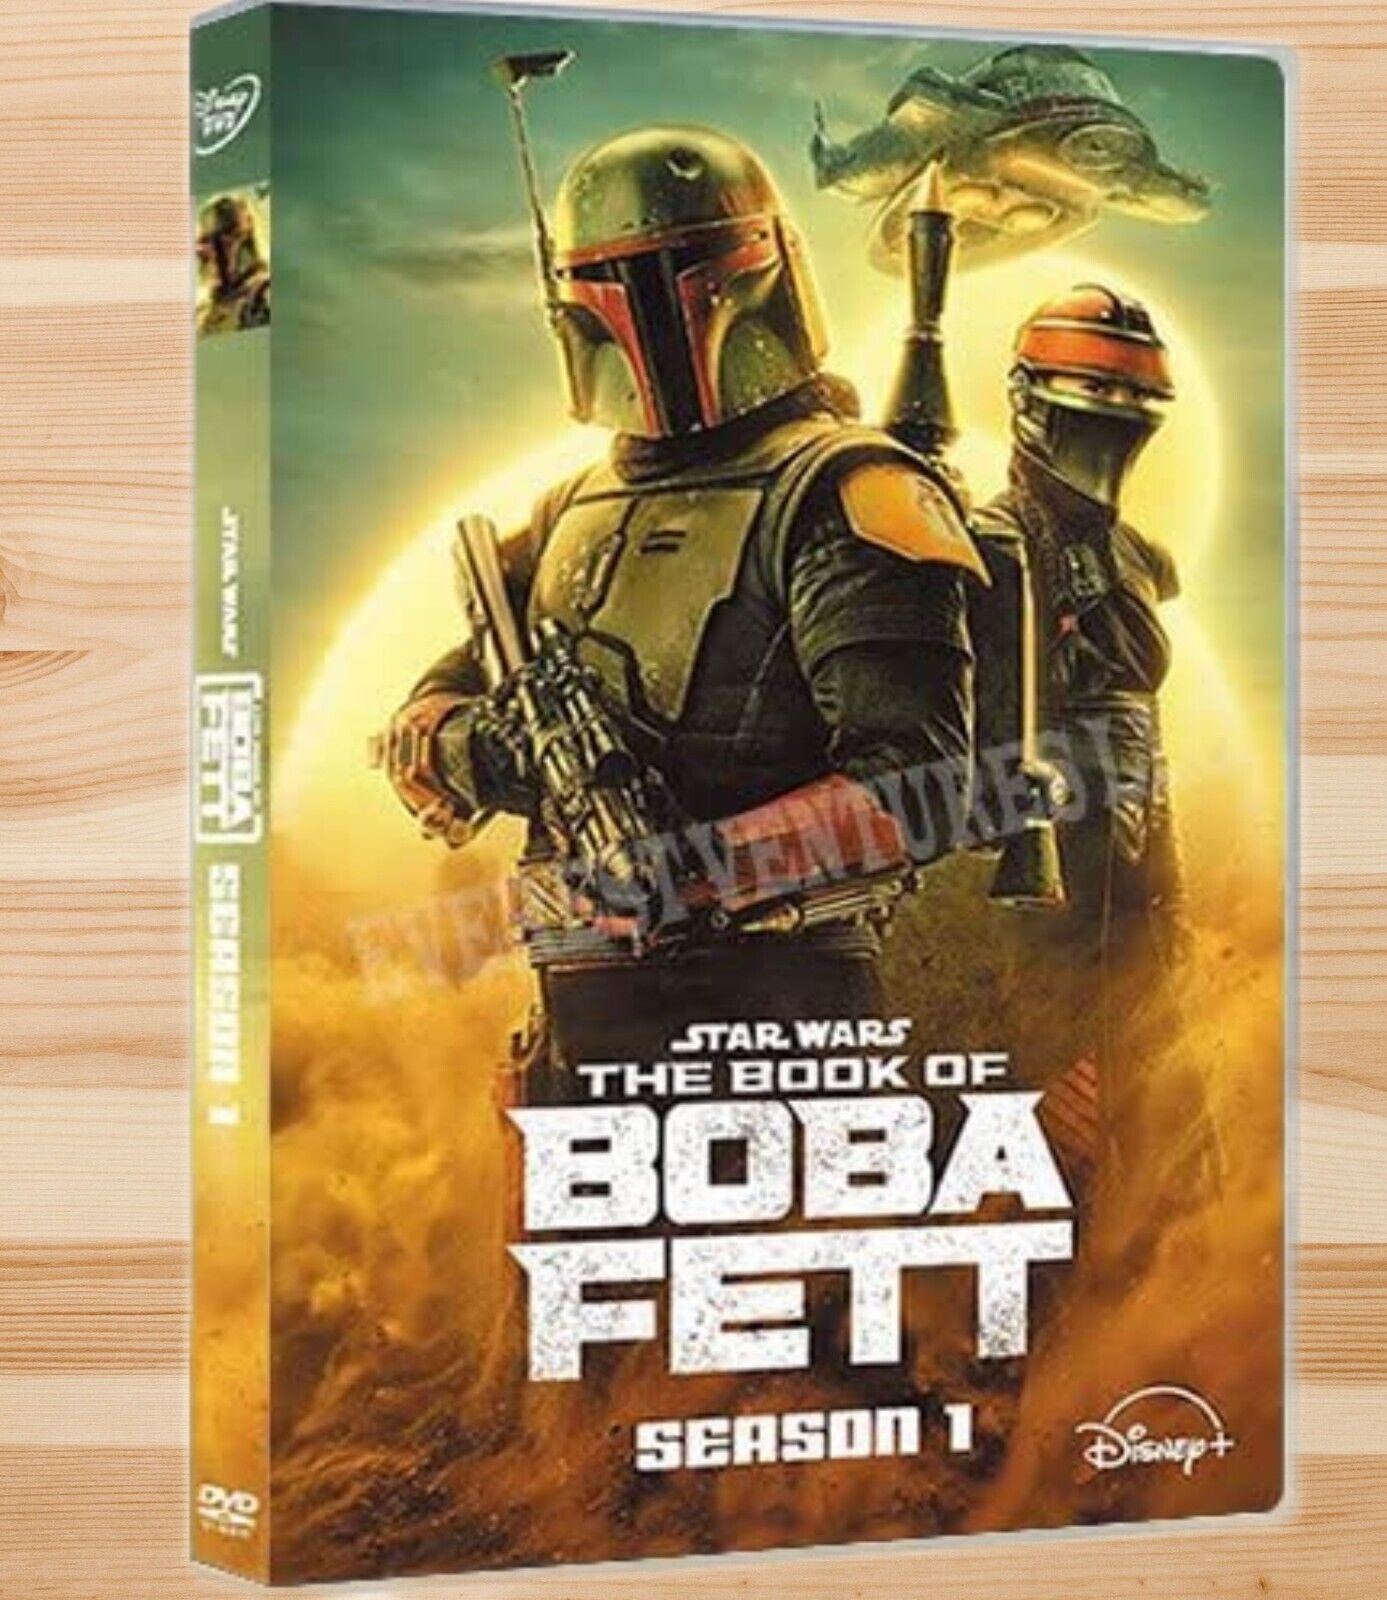 Star Wars, The Book of Boba Fett: The Complete Season 1 ( DVD) Free Delivery